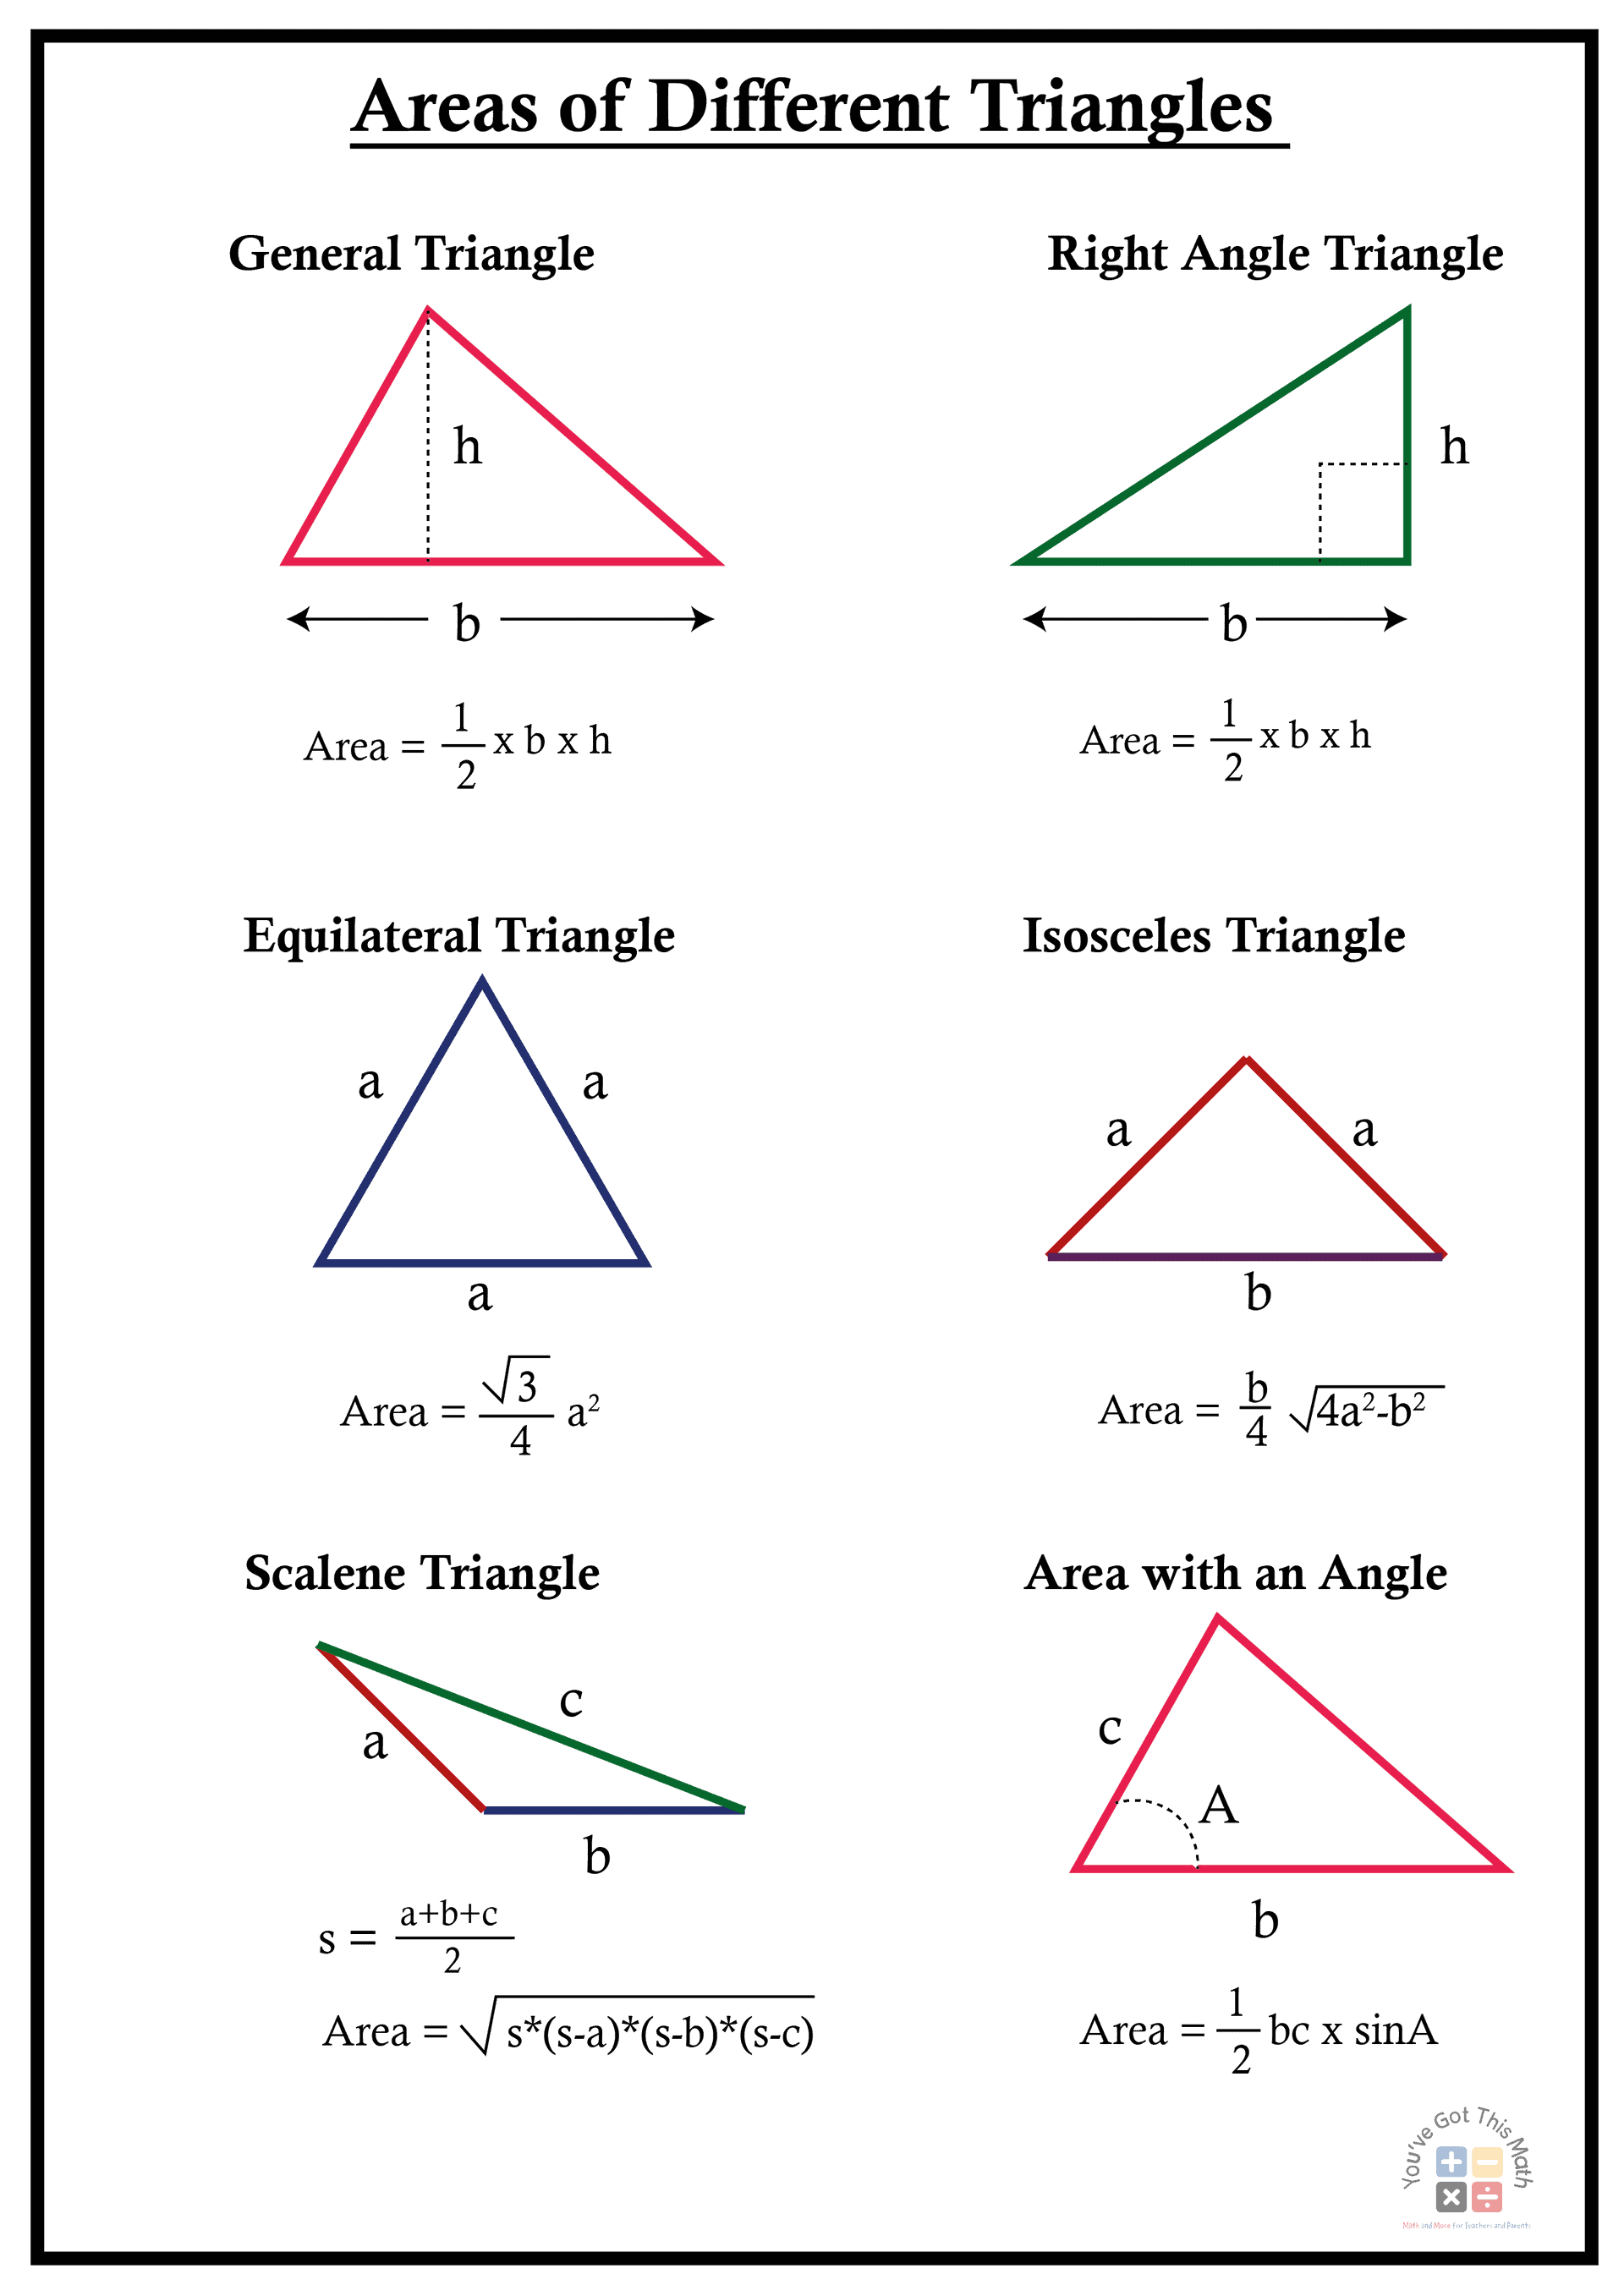 1- Area of different triangle